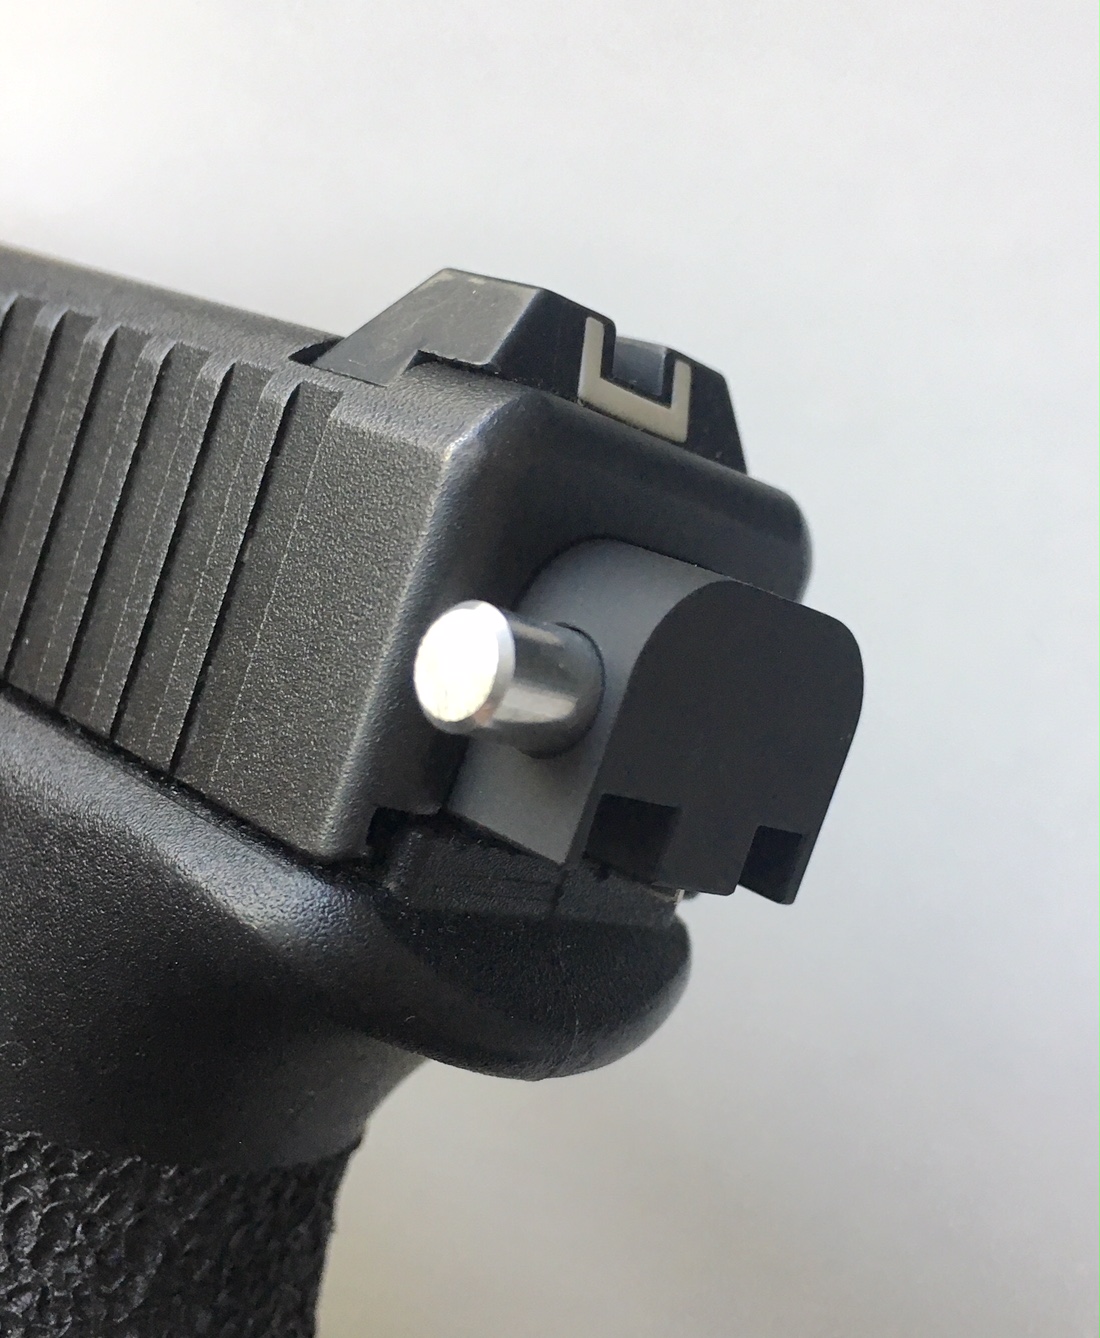 Glock Full Auto Switch From China For Sale All in one Photos.